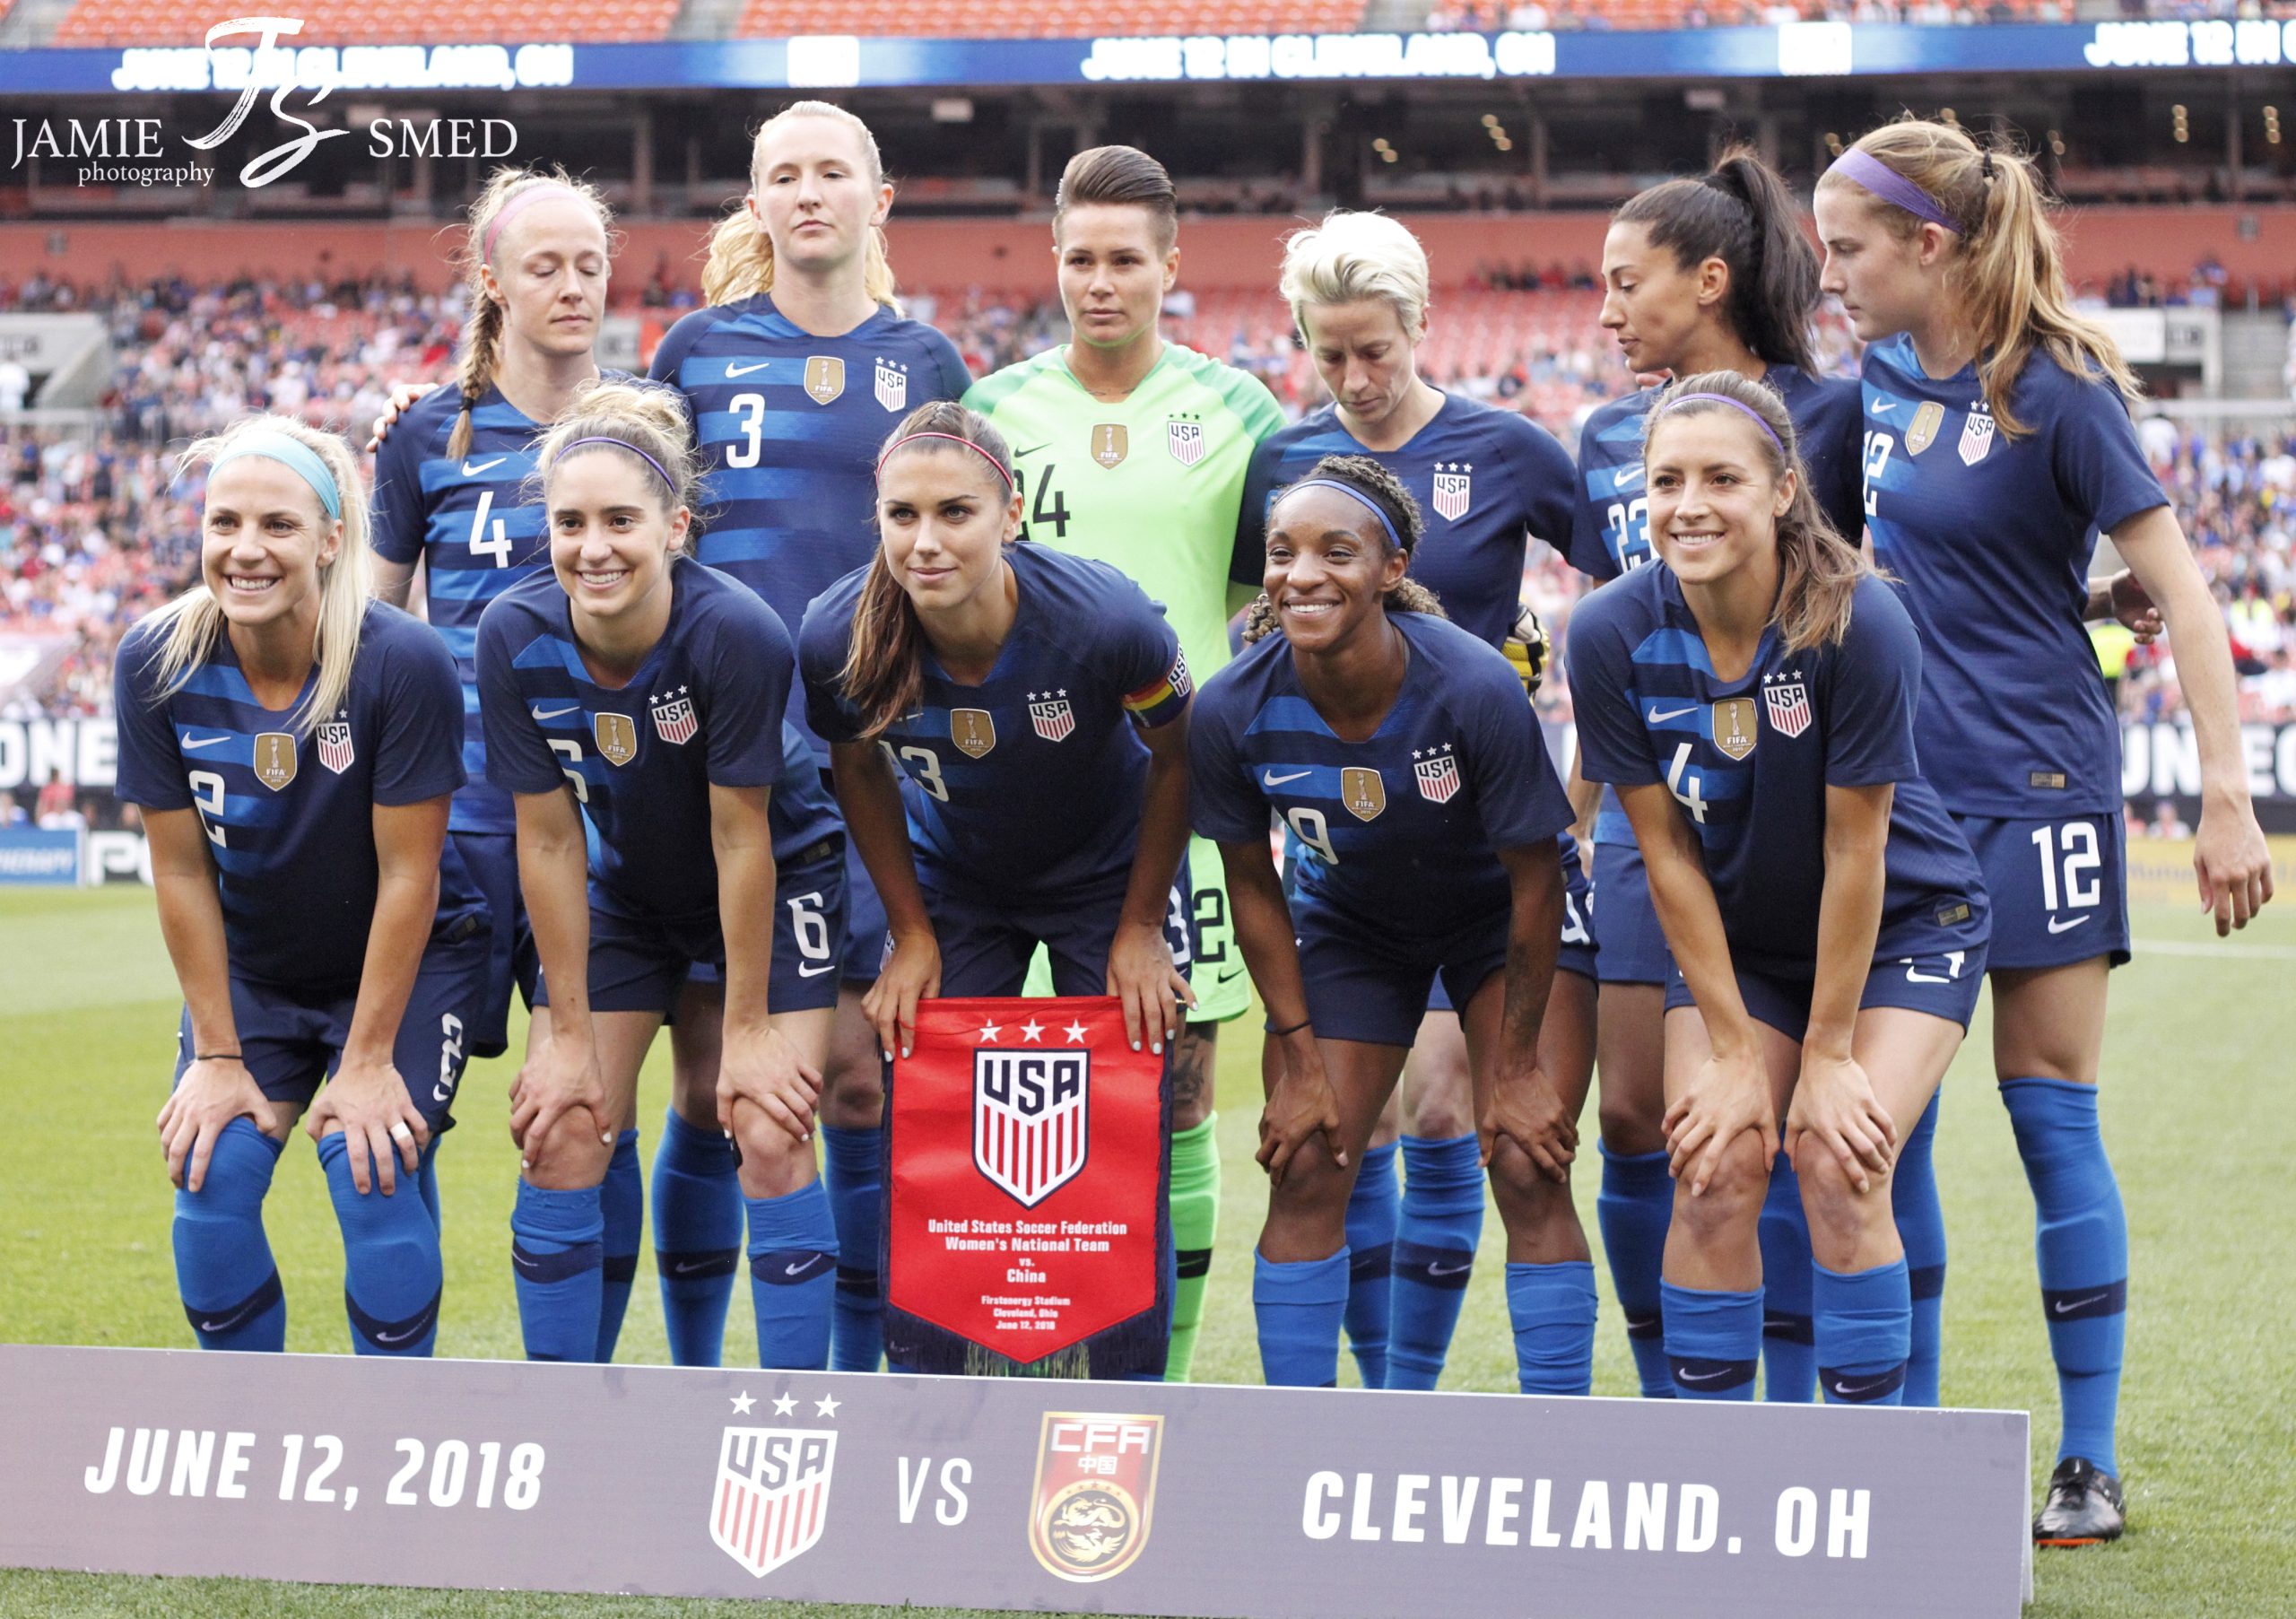 Will the USWNT win big again? Jamie Smed, taken 12 June, 2018. https://commons.wikimedia.org/wiki/File:USWNT_group_photo_%2842878126761%29.jpg